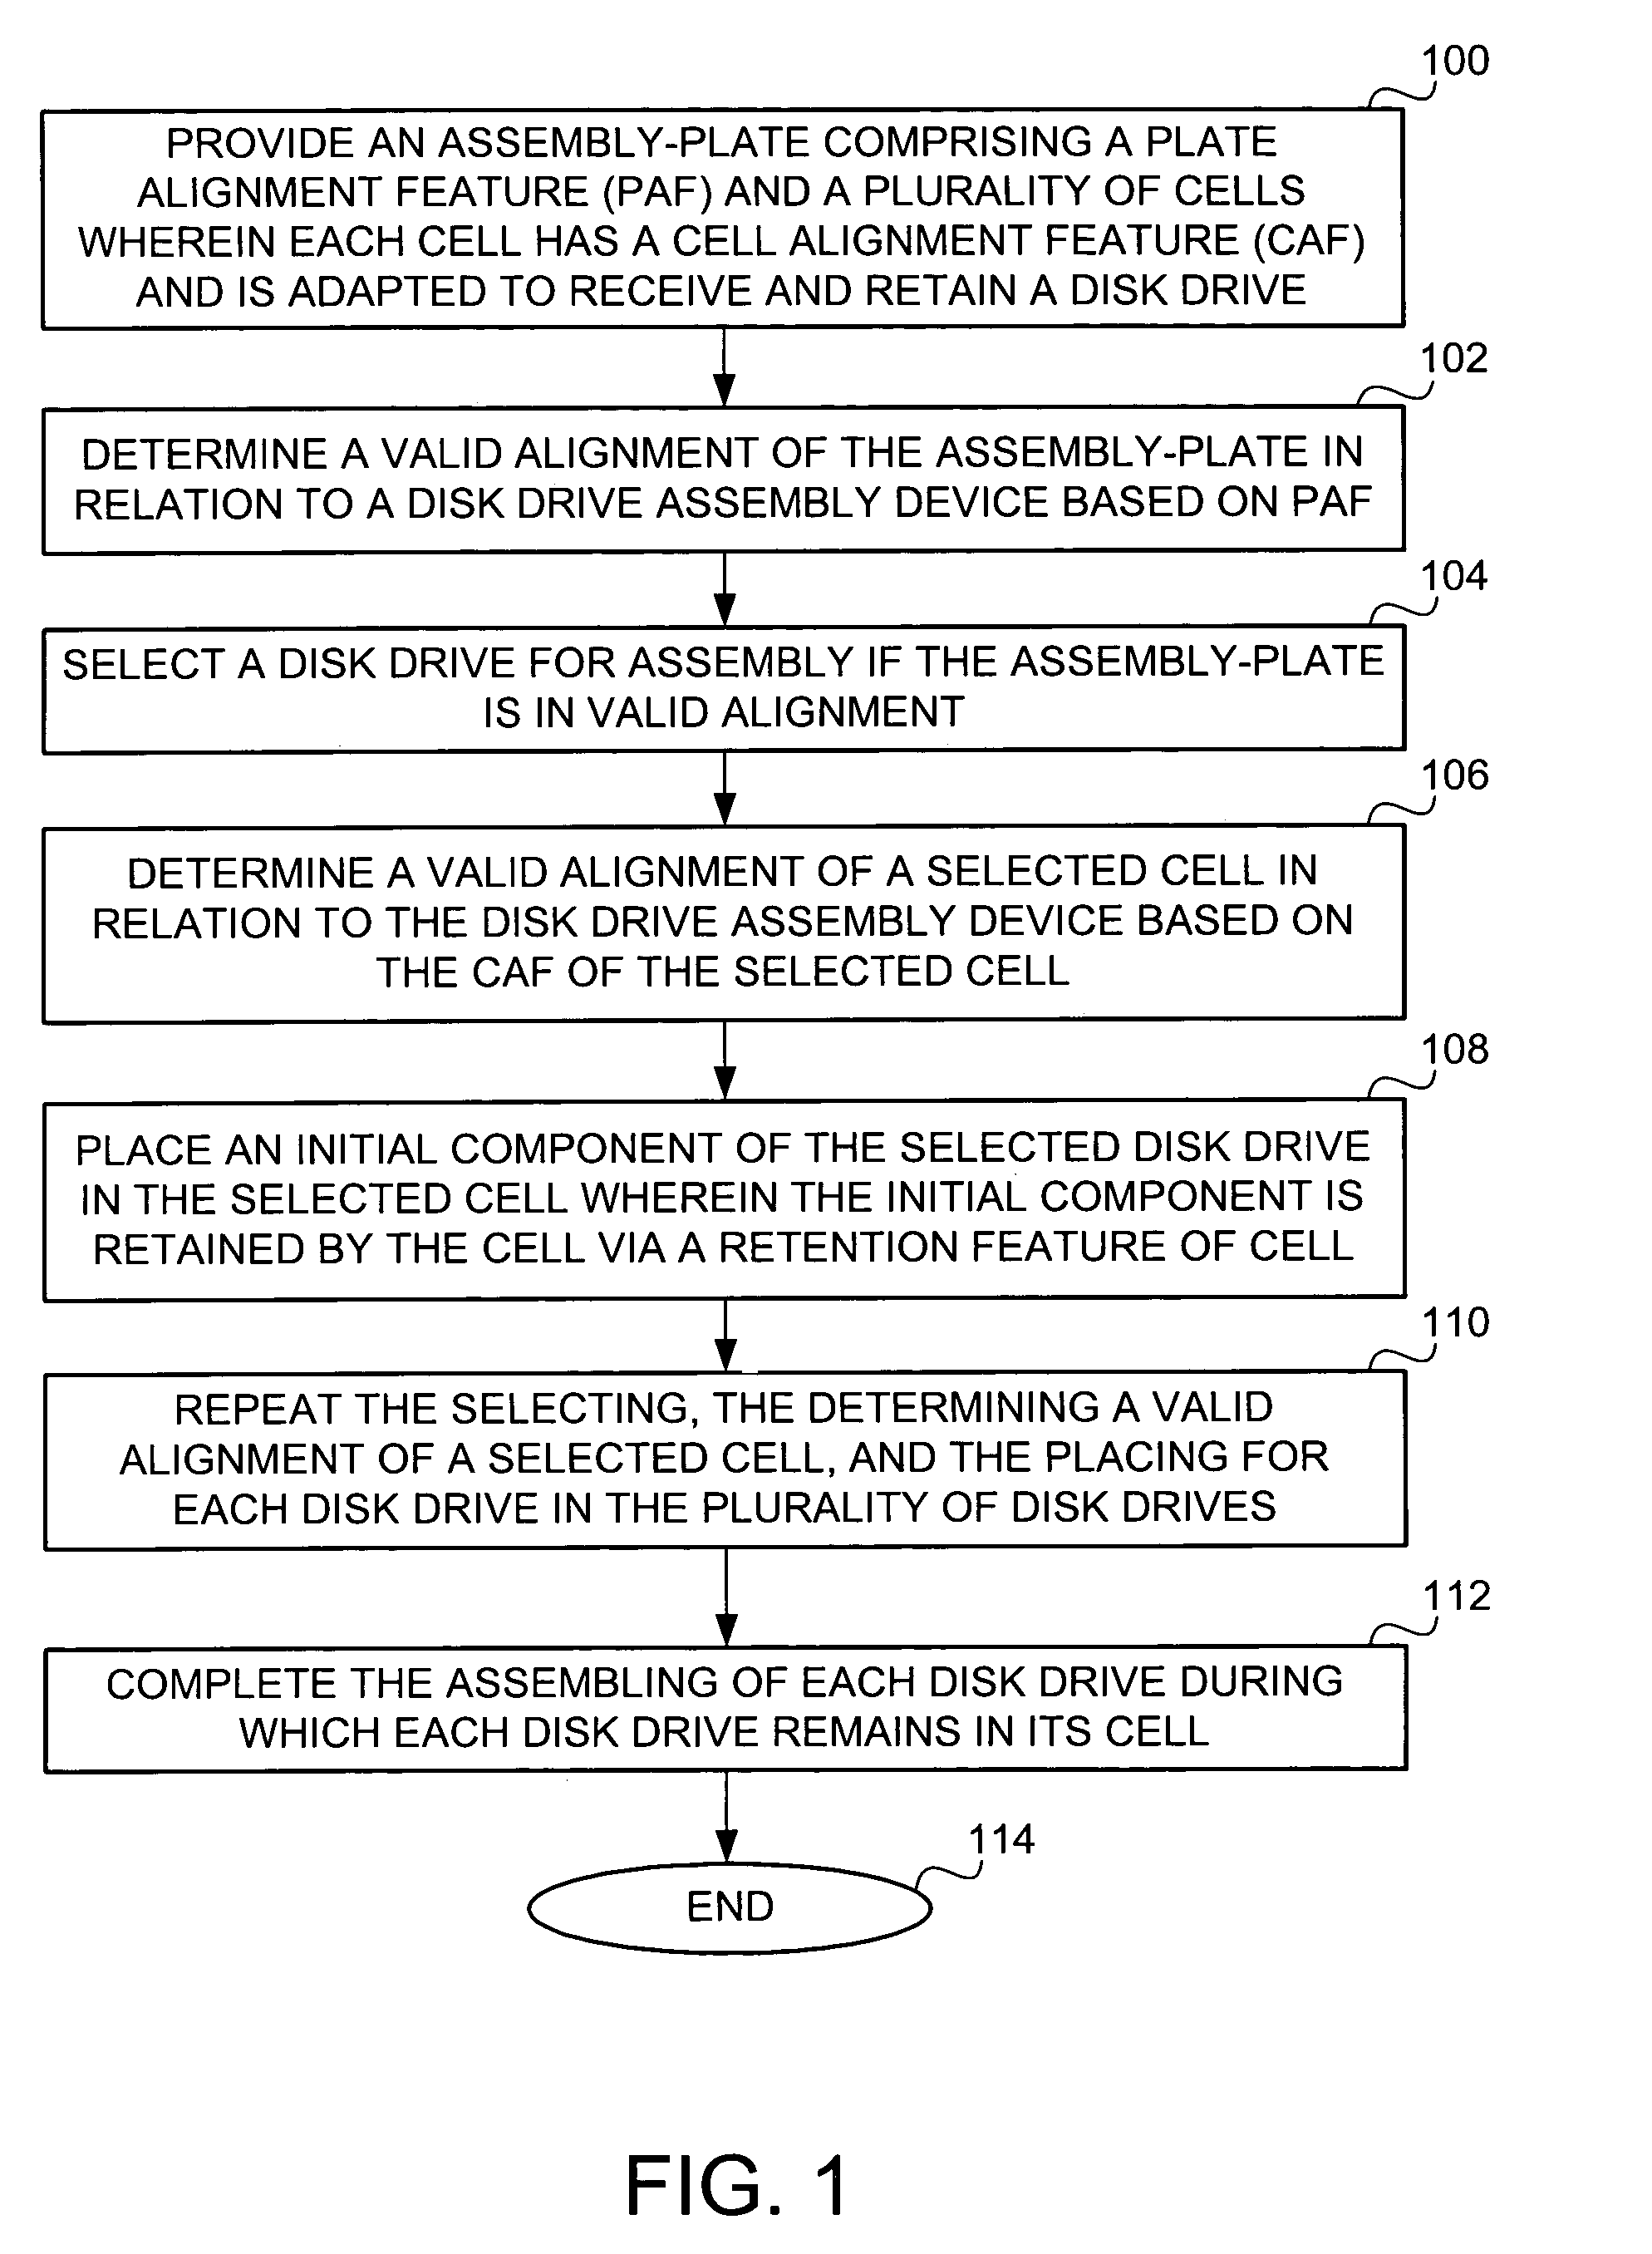 Method of assembling a plurality of disk drives